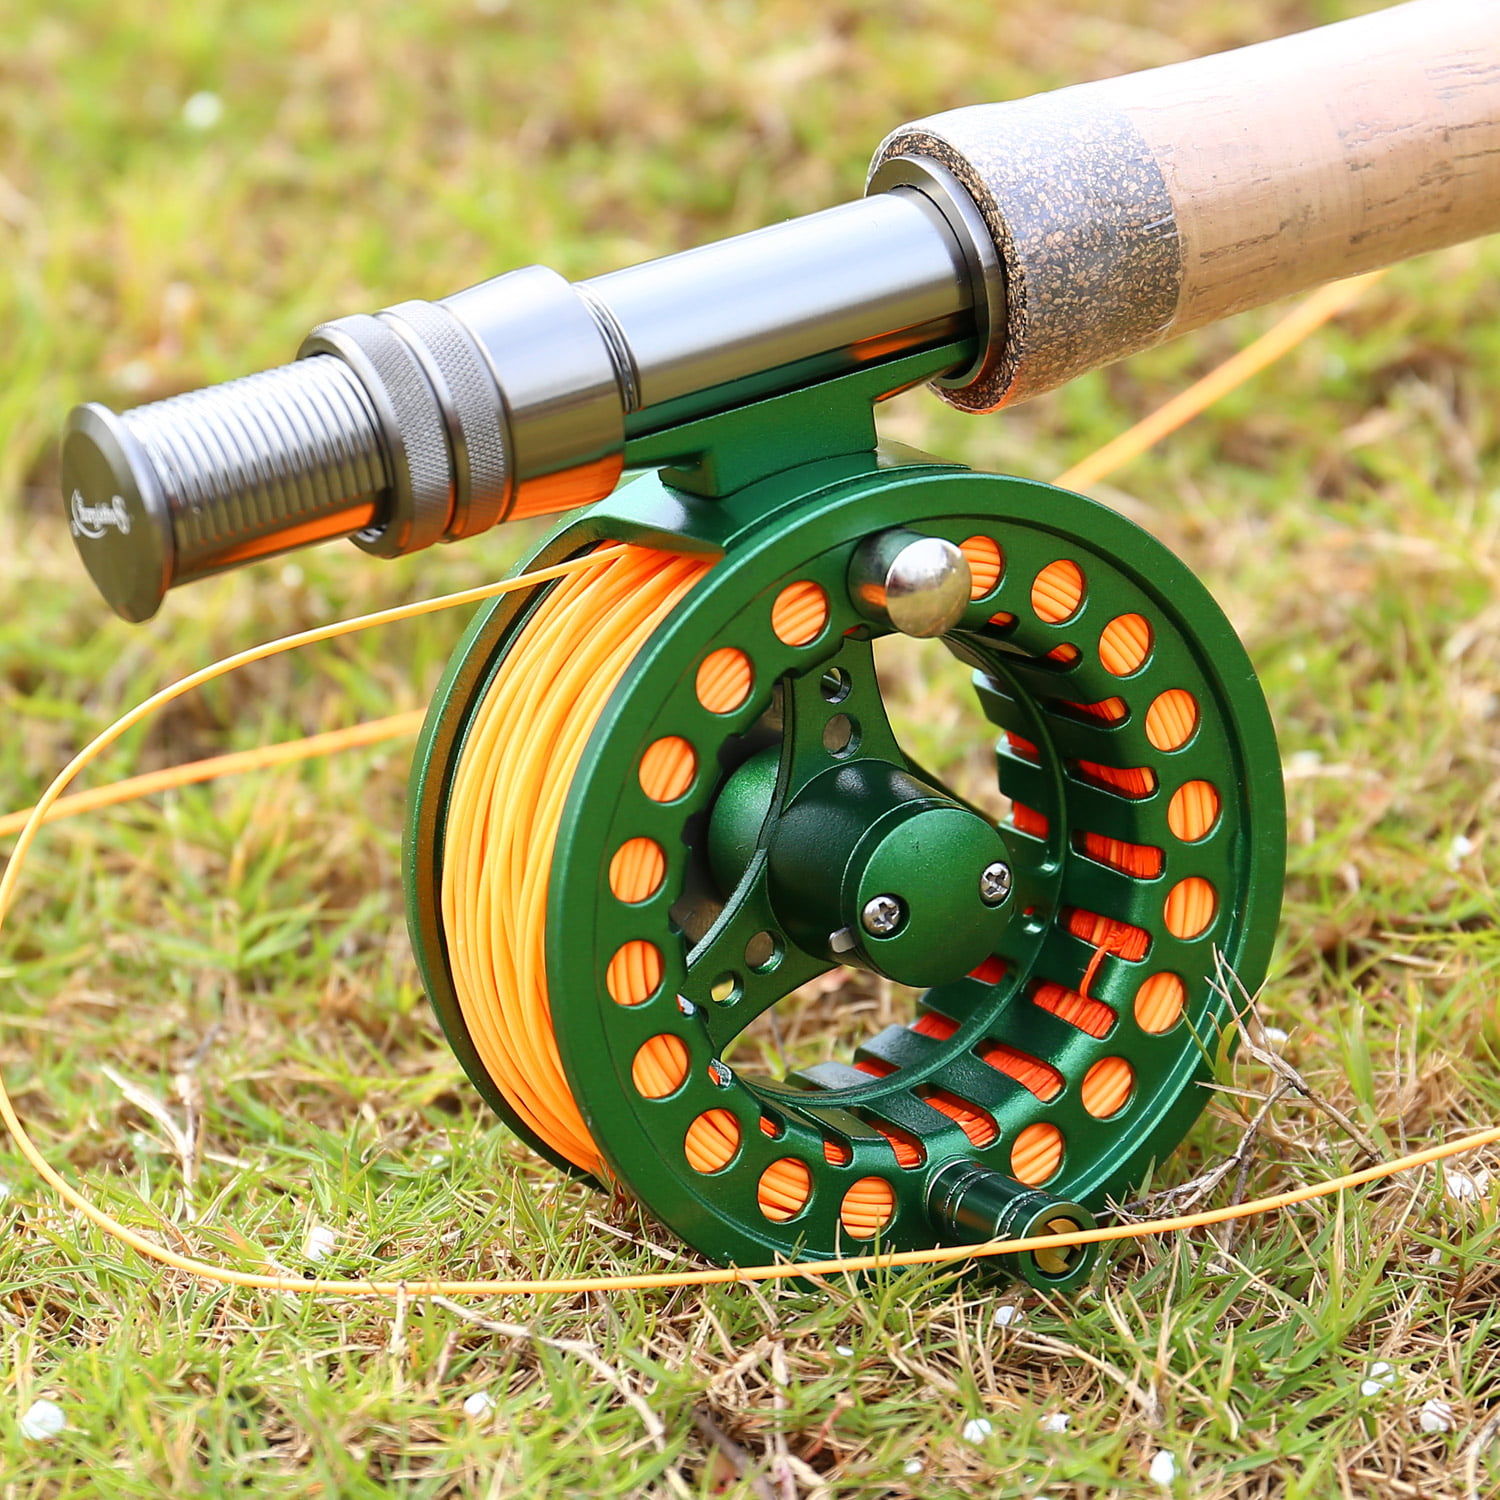 Matymats Large Arbor Fly Reel with line, Fly Fishing Reel Left/Right Hand,  Black Fly Reels, Fly Fishing Reel with Loaded Line for Trout Bass Carp Pike